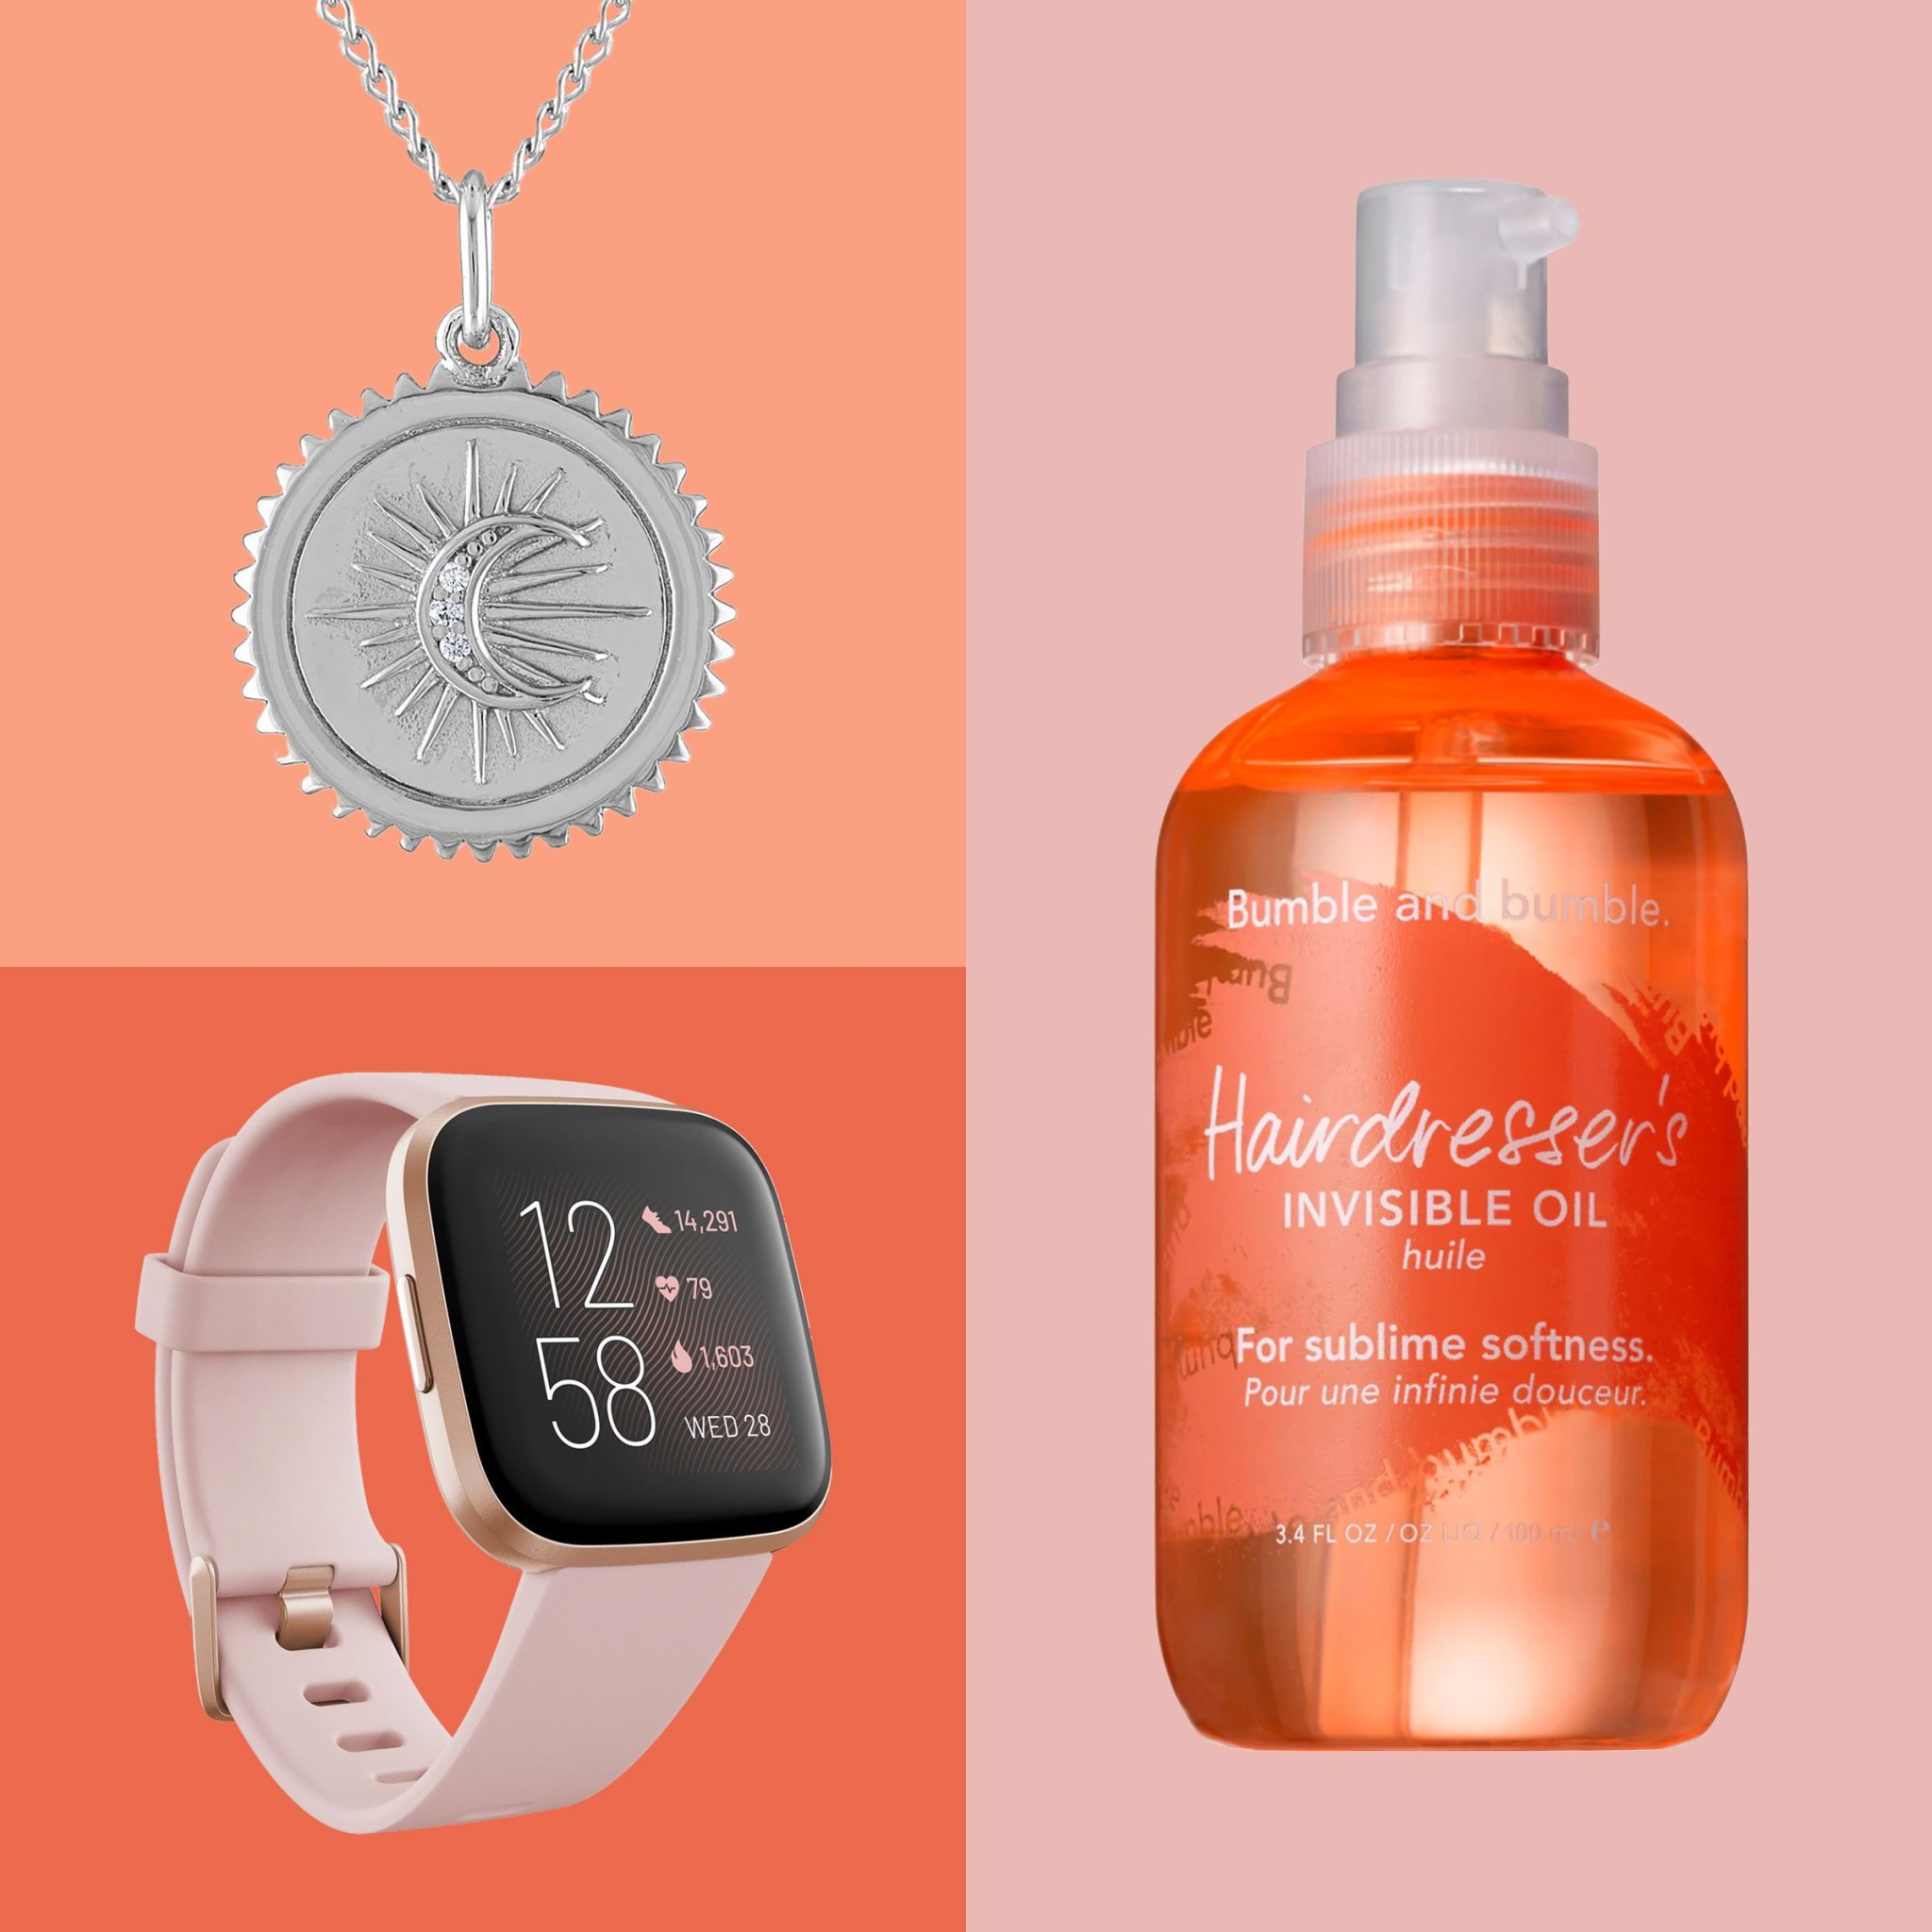 39 Great Gifts for Your Sister That She’s Guaranteed to Love